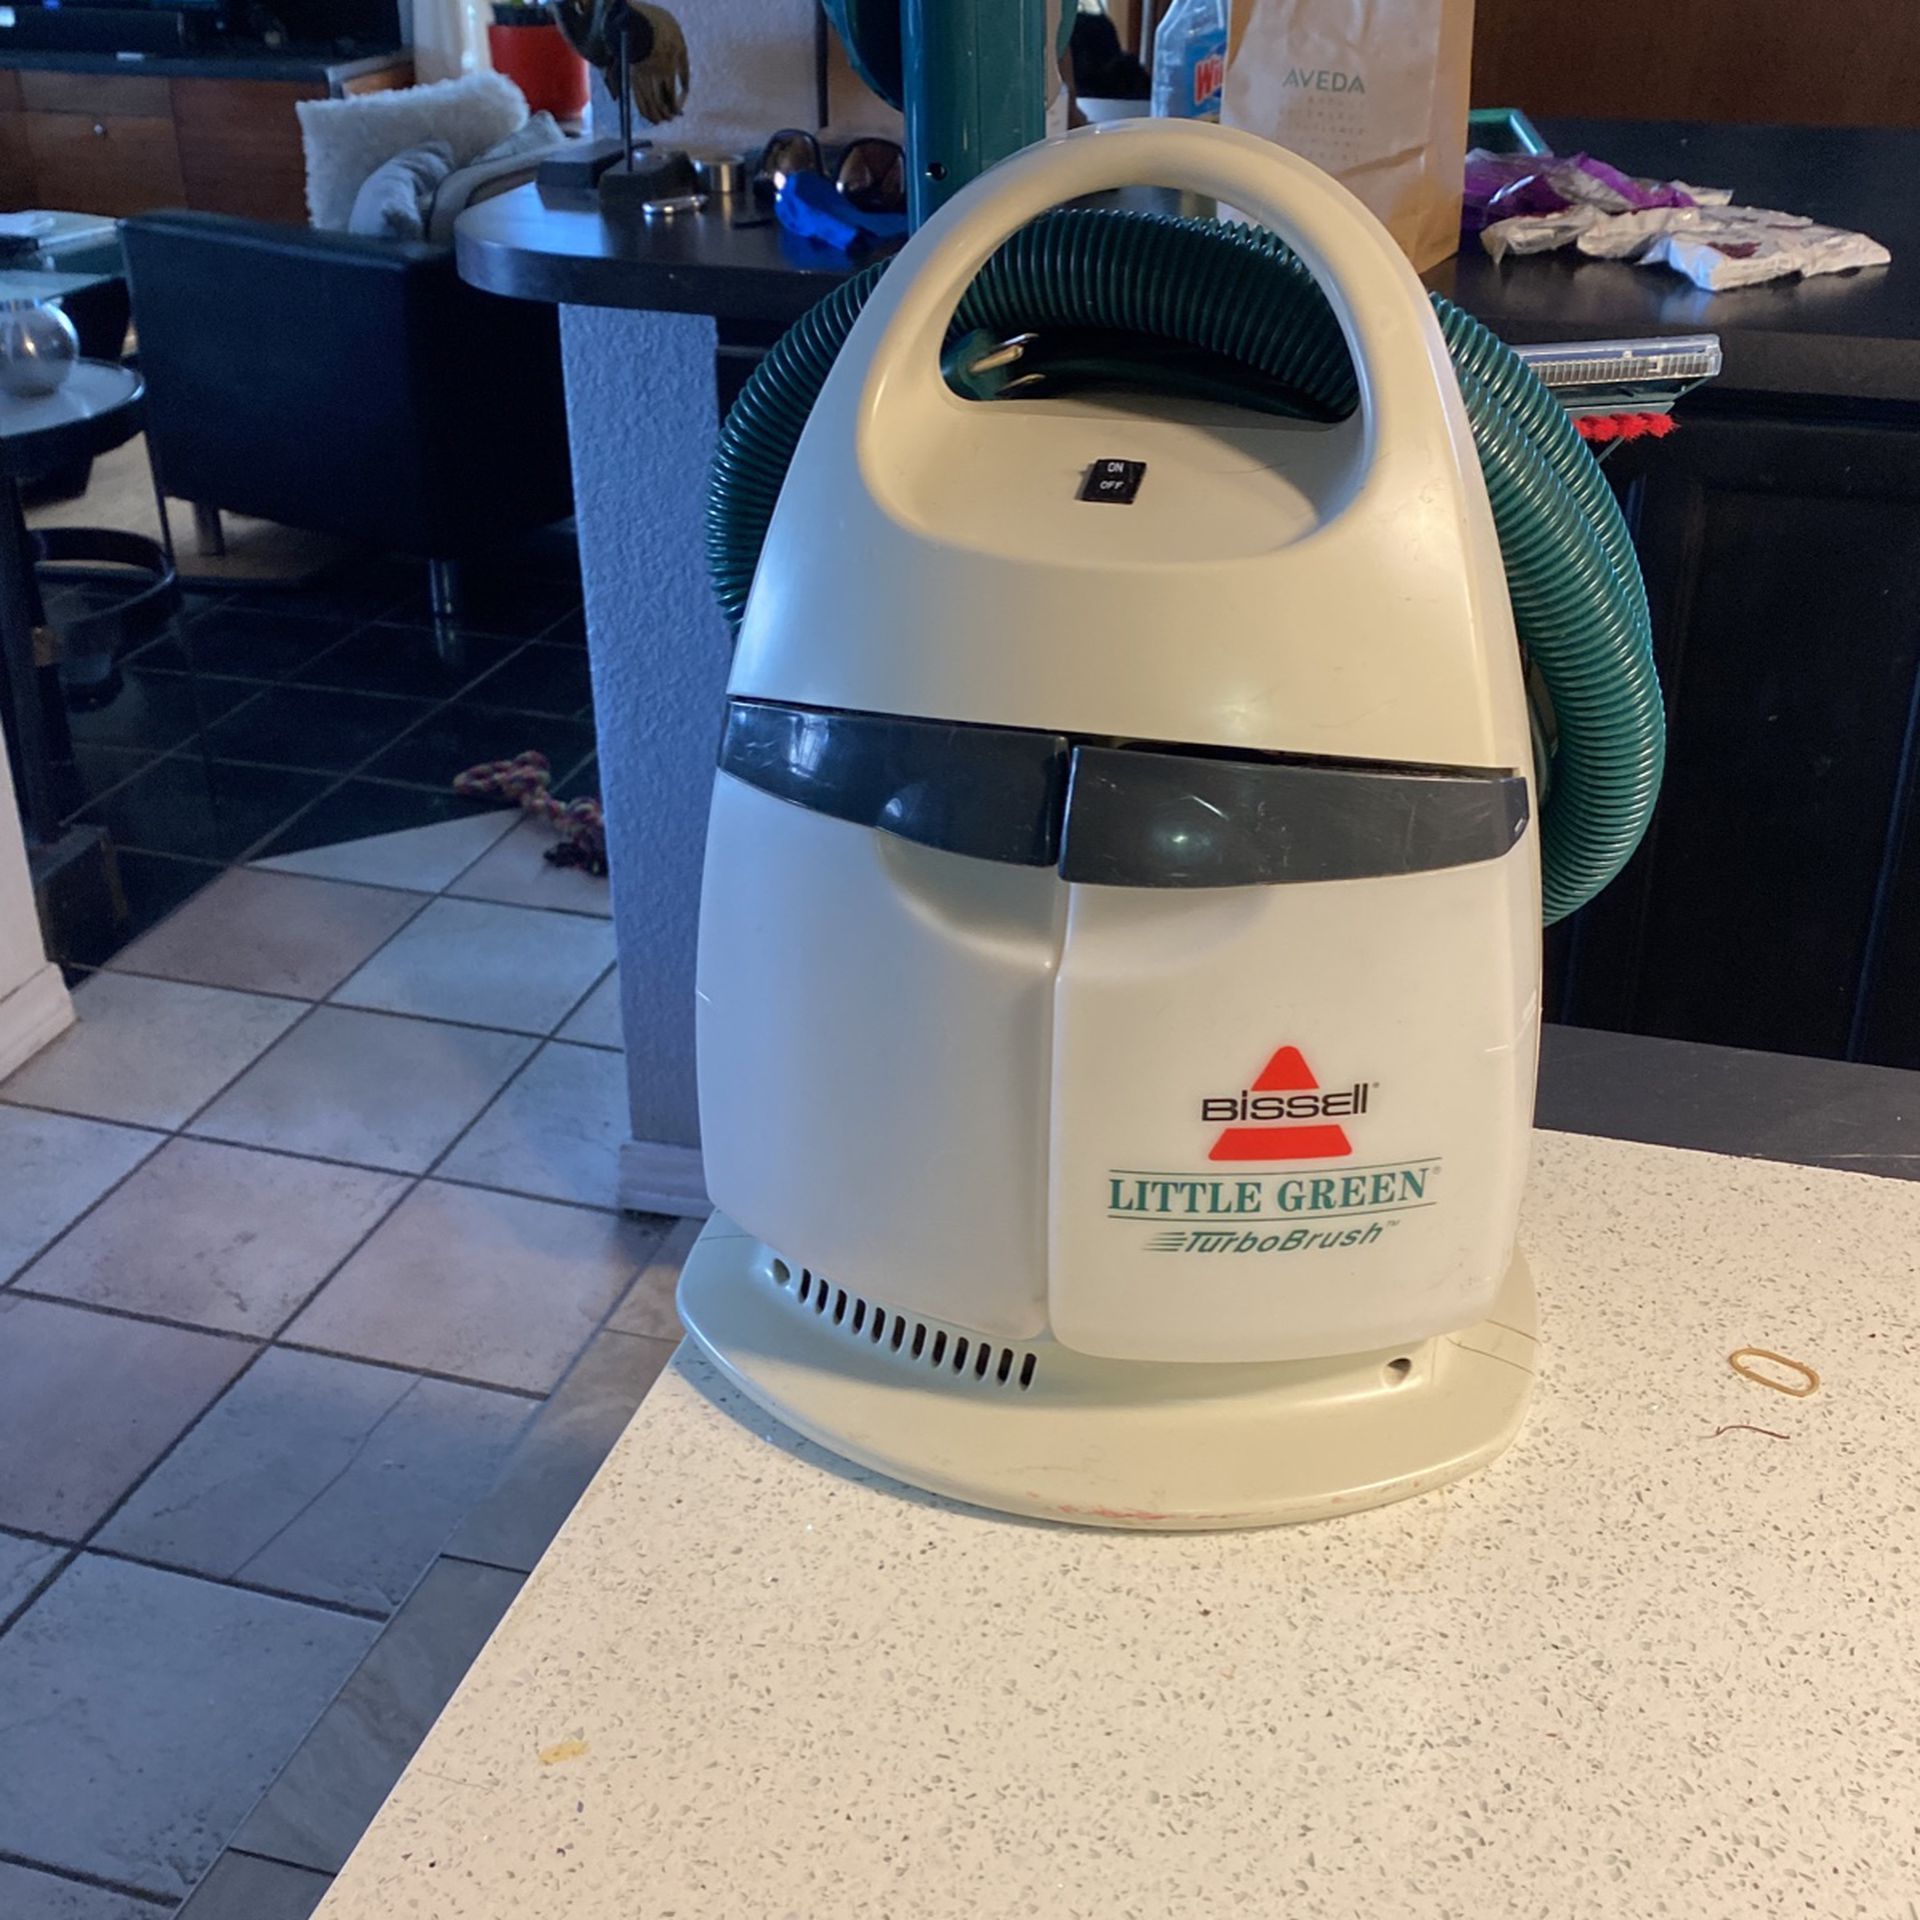 Little Green Bissell Cleaner